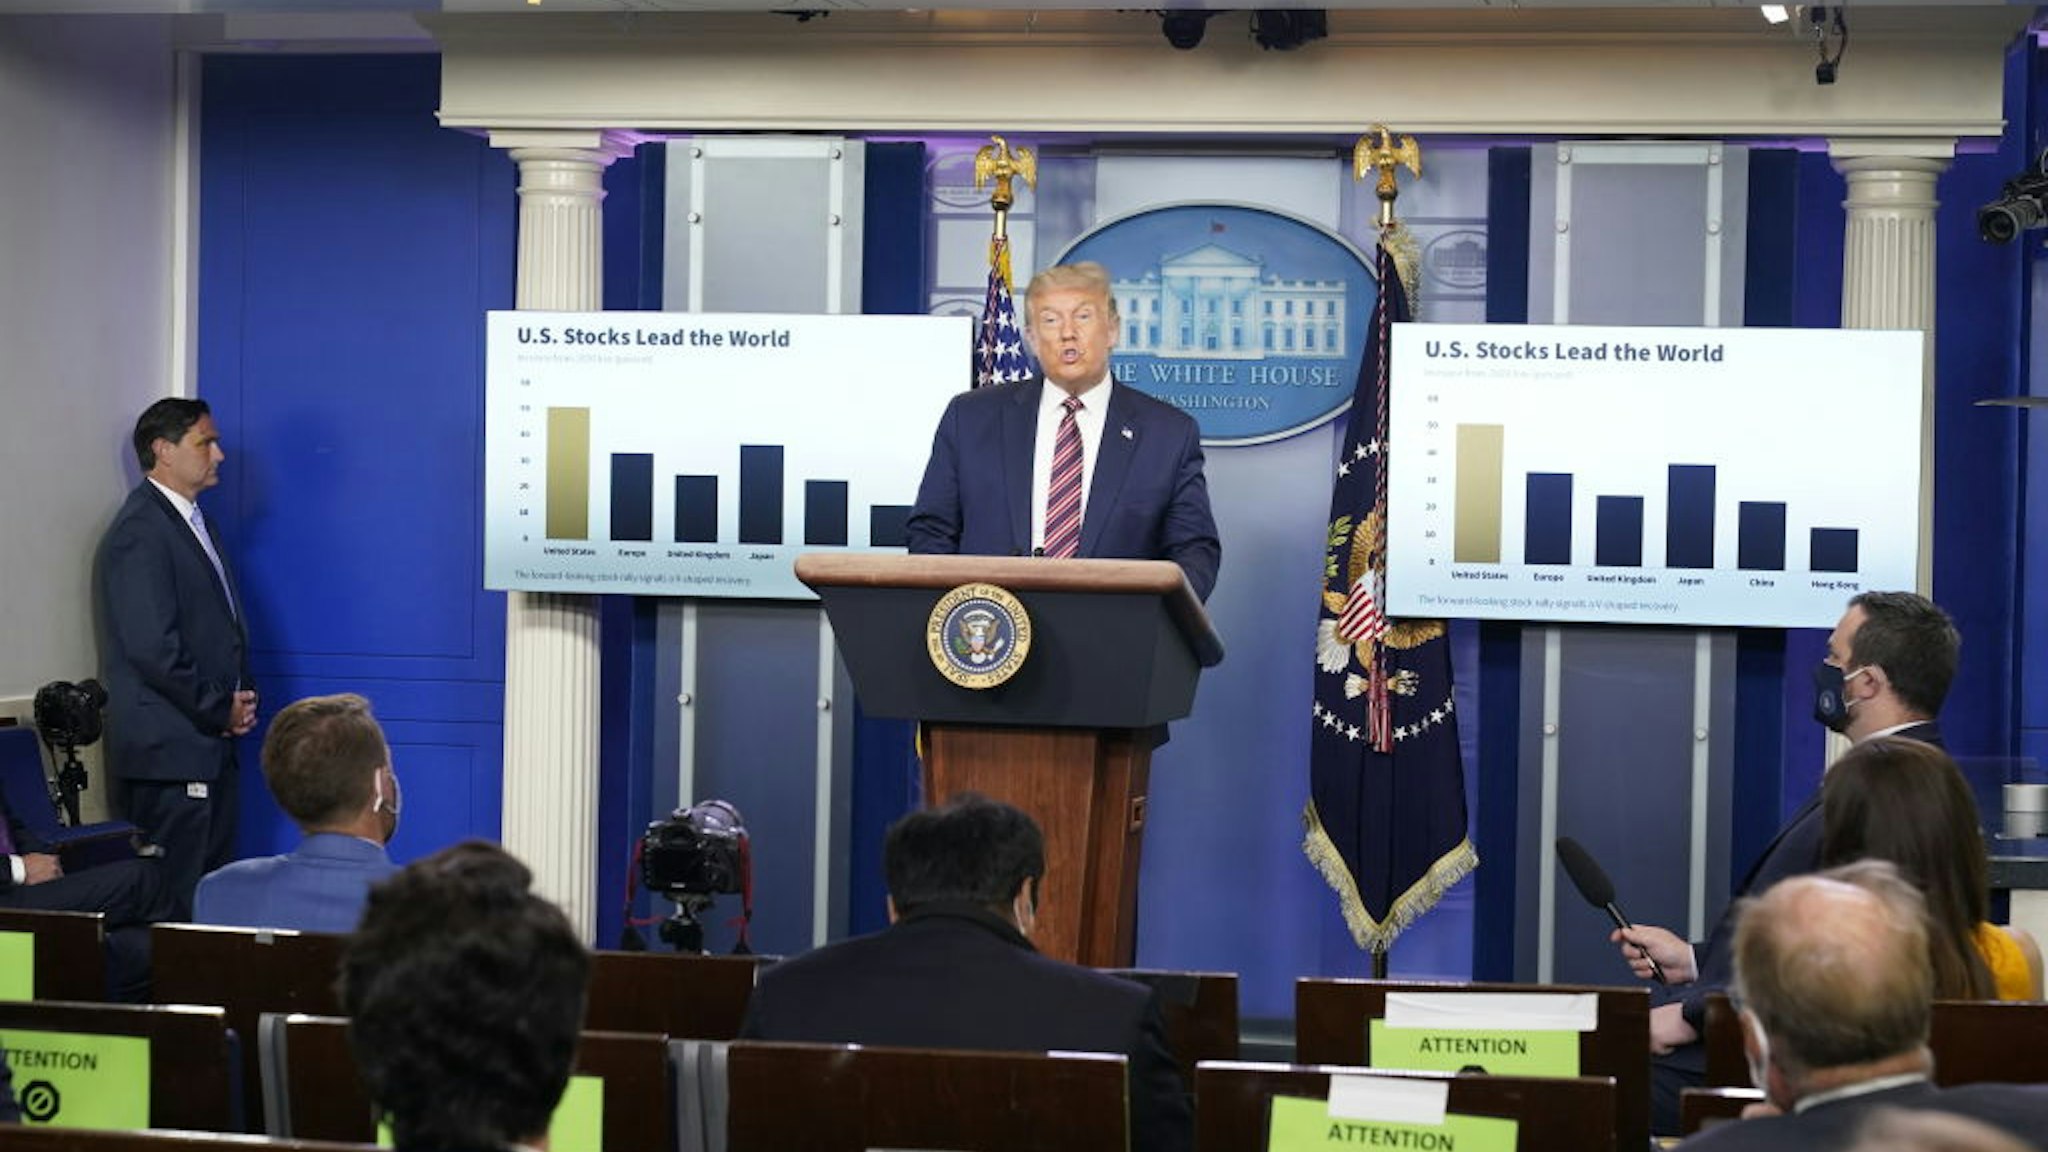 U.S. President Donald Trump speaks during a news conference in the James S. Brady Press Briefing Room at the White House in Washington, D.C., U.S. on Wednesday, Aug. 12, 2020. Trump stepped up his effort to push school systems to reopen by hosting an event at the White House featuring parents, educators and researchers who argued for in-person learning. Photographer: Chris Kleponis/Polaris/Bloomberg via Getty Images